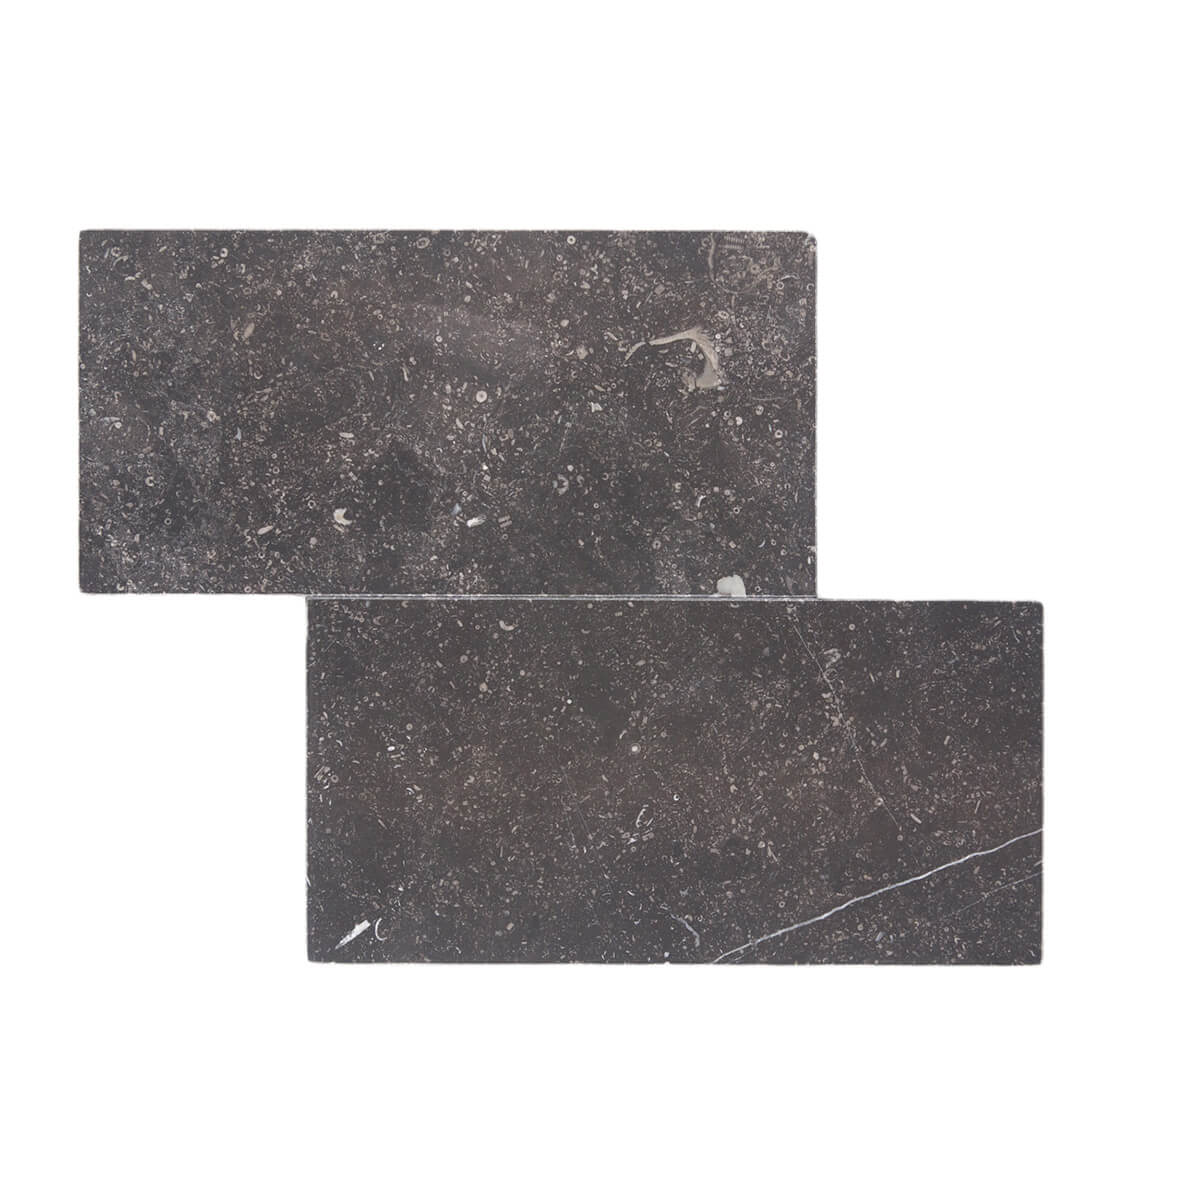 Noir Sully limestone field tile - 6x12x0.375 inches - honed finish - versatile and durable